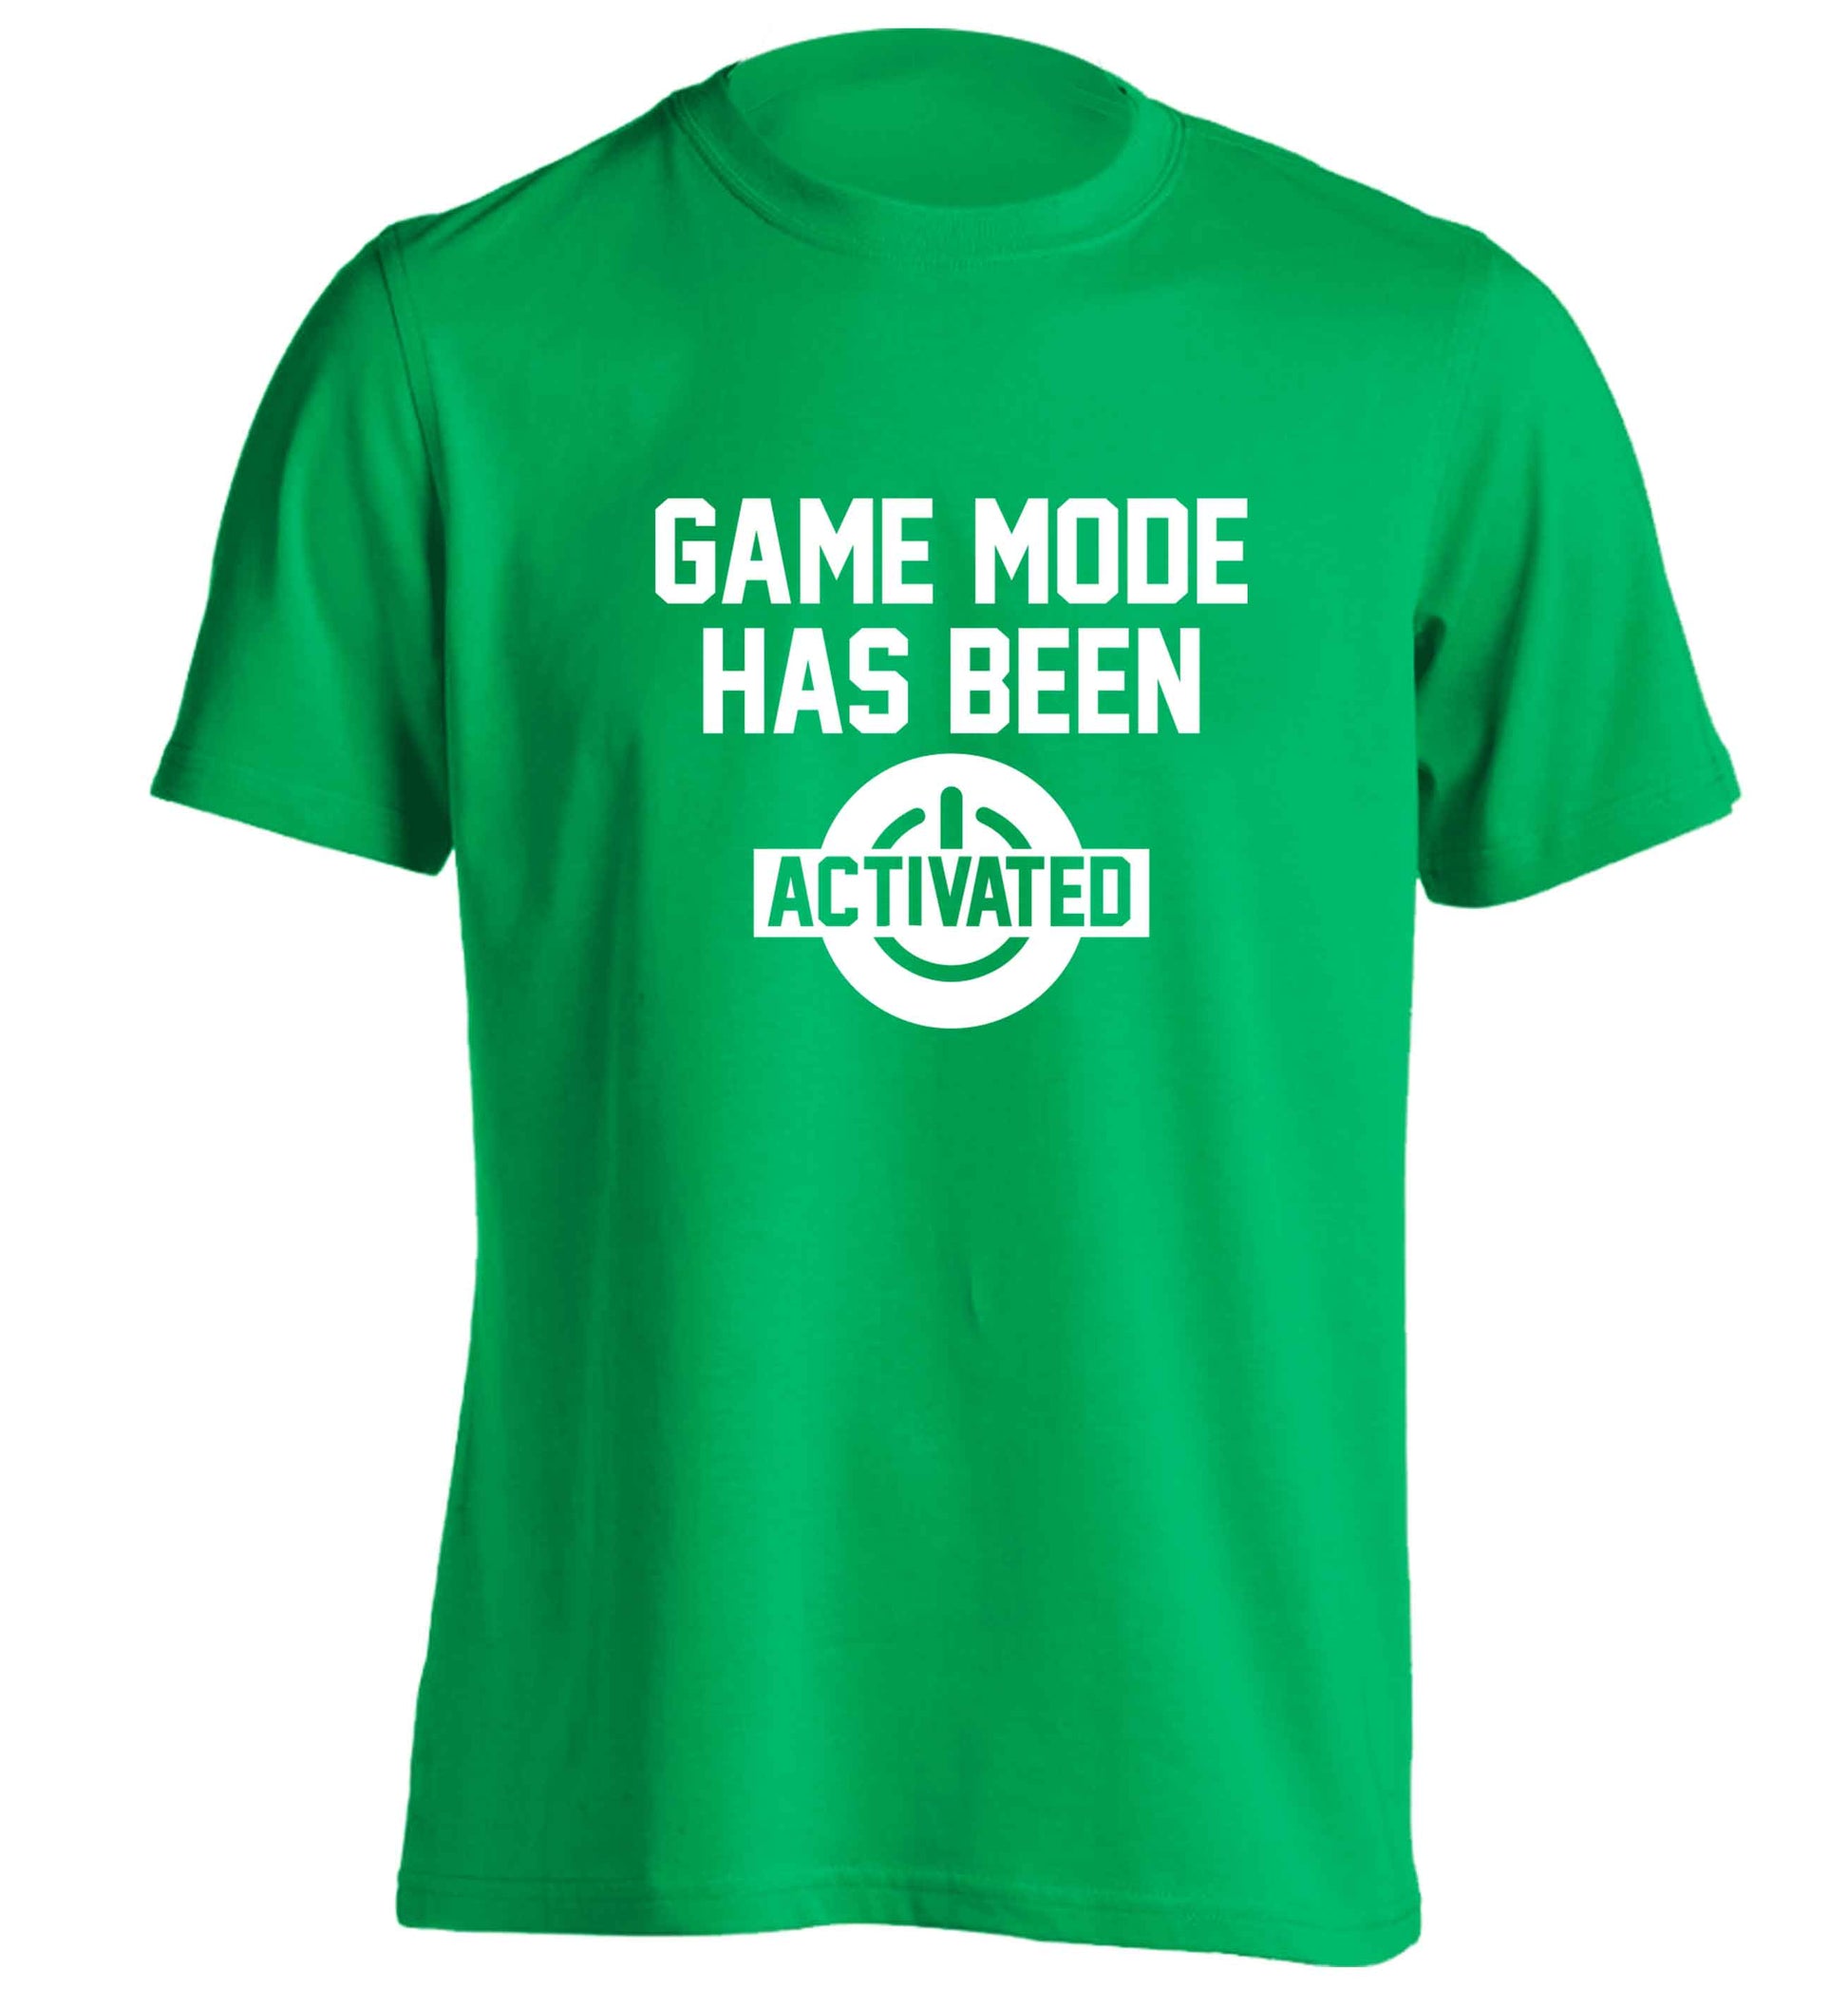 Game mode has been activated adults unisex green Tshirt 2XL